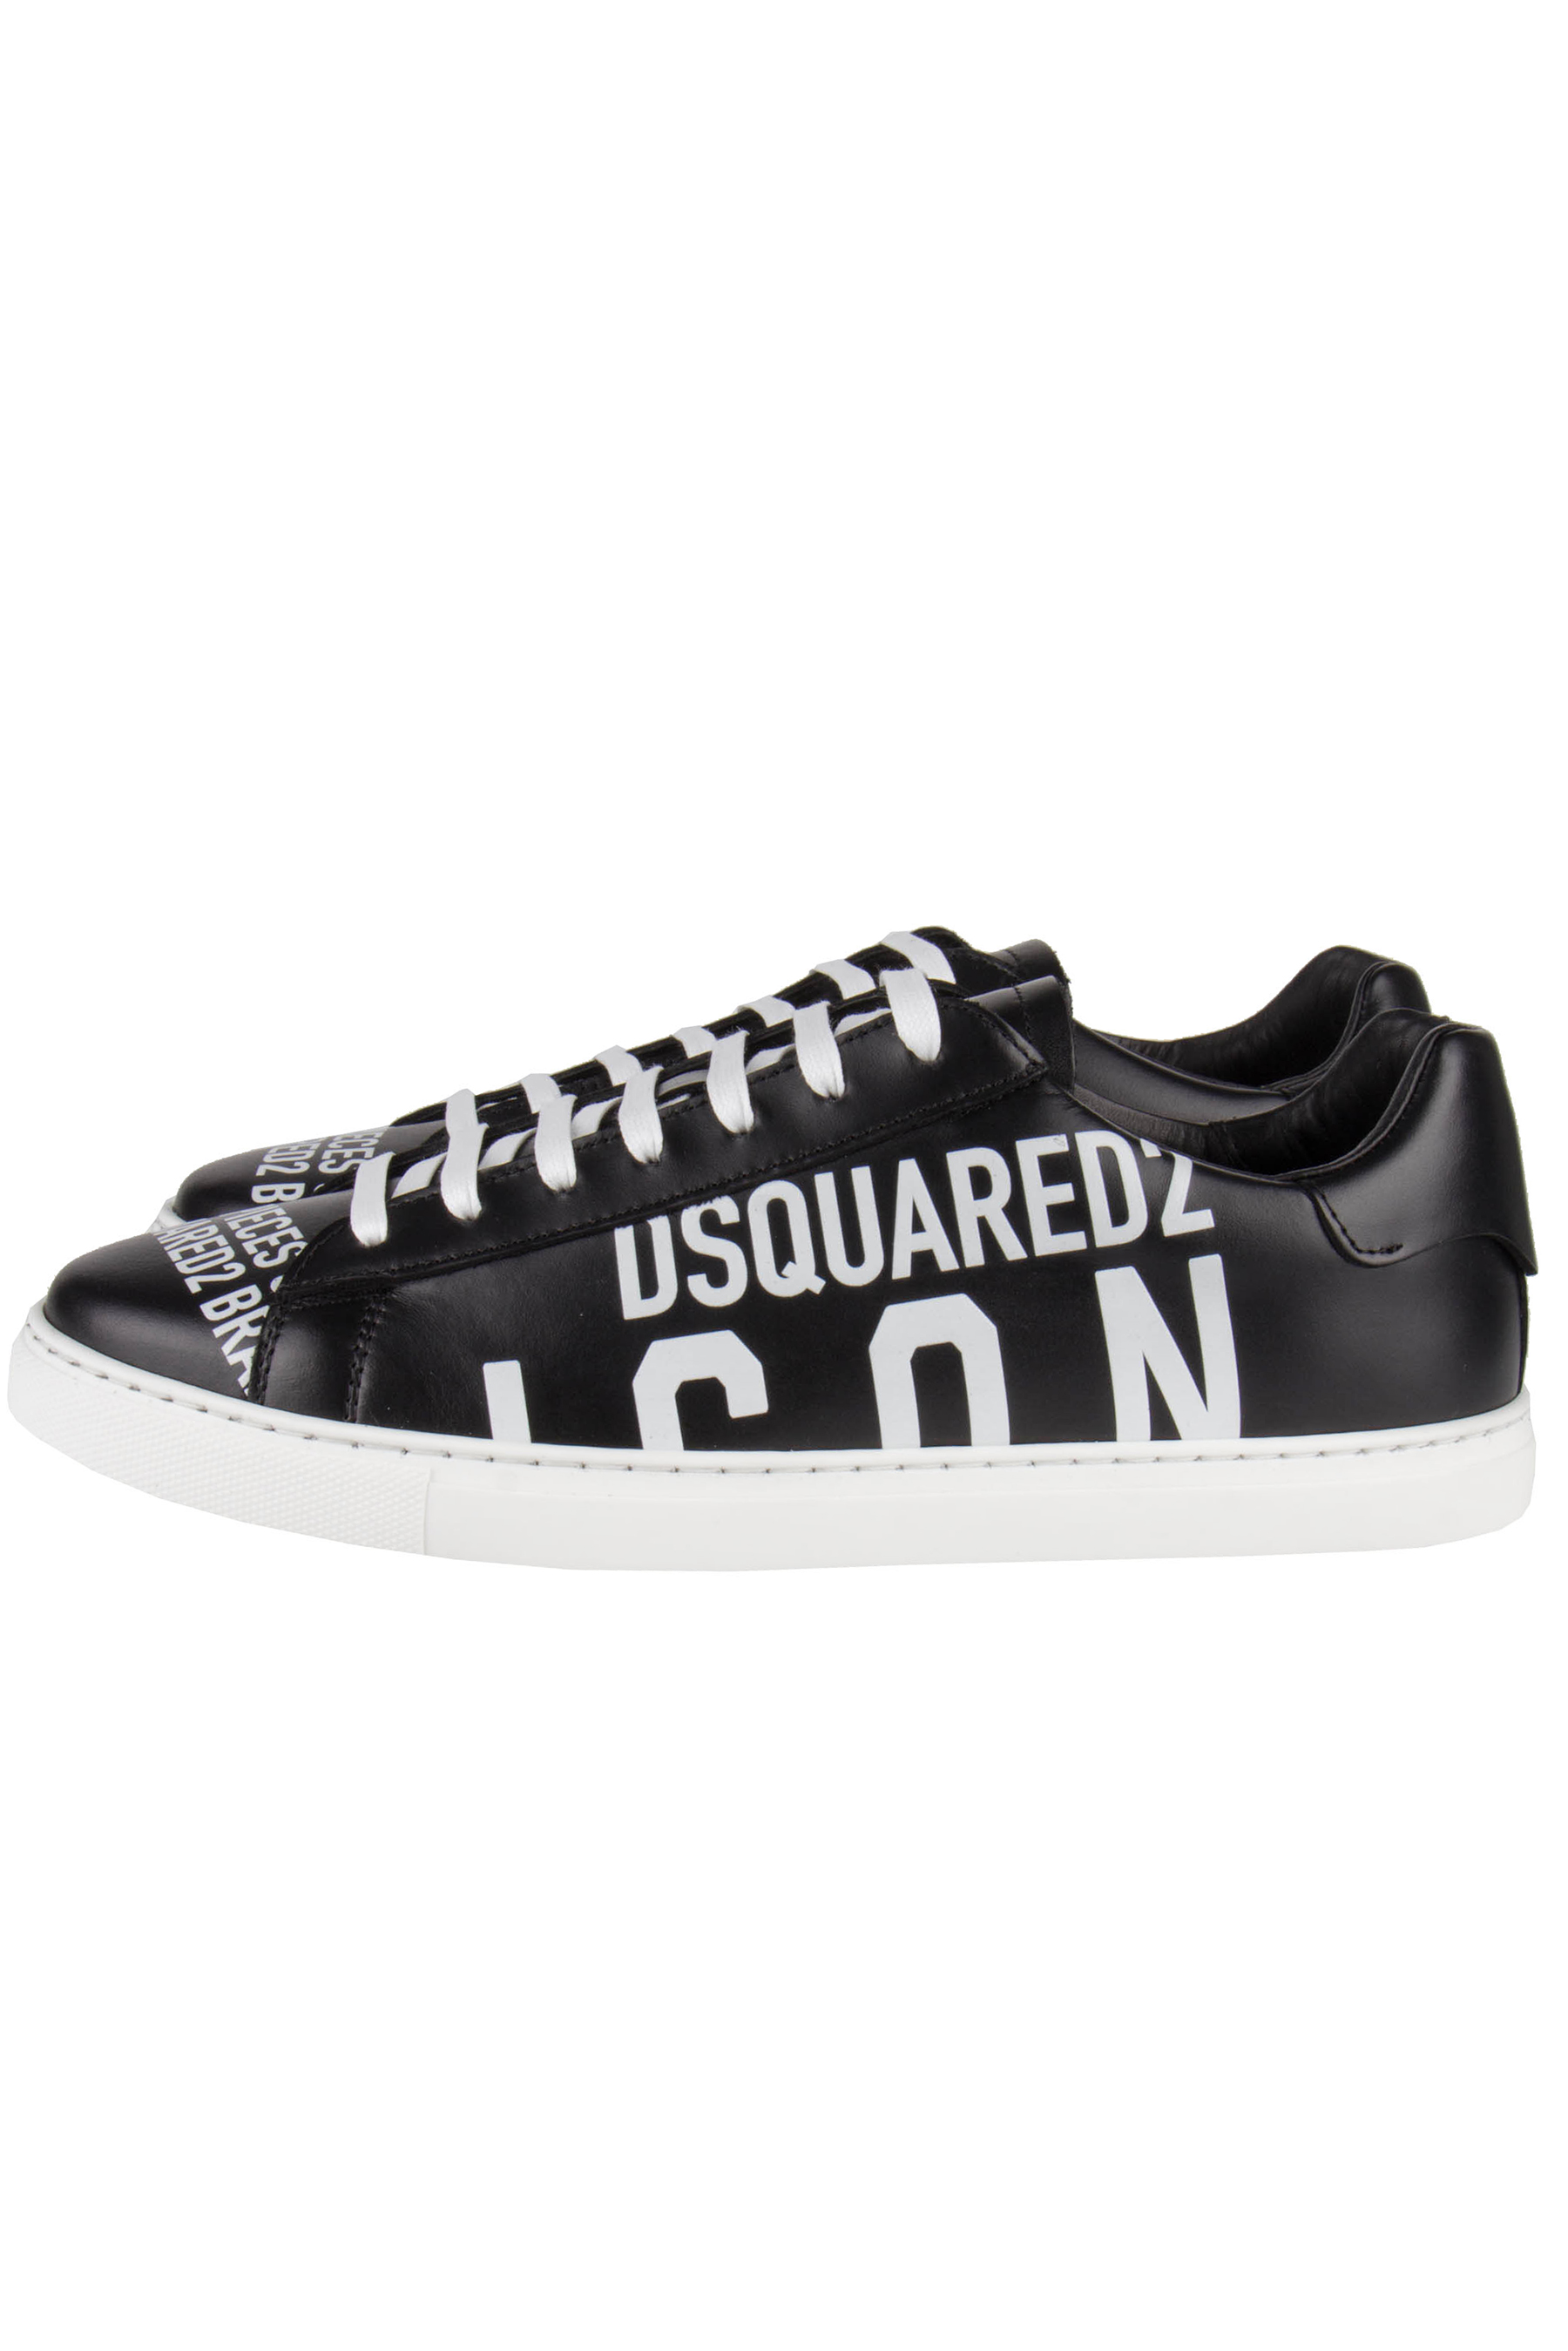 dsquared trainers flannels